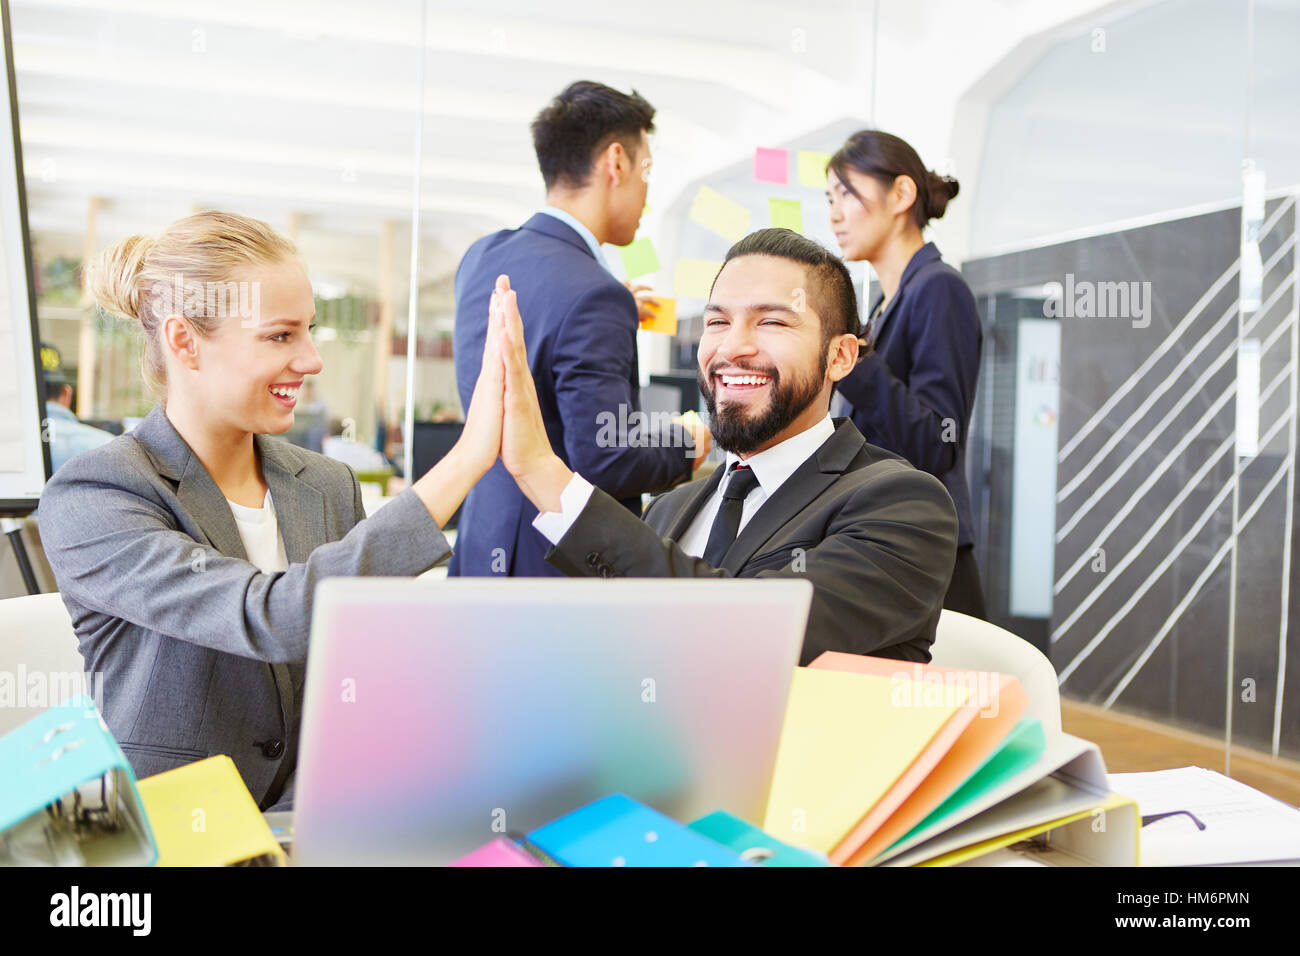 Two founds share High Five and celebrate their teamwork success Stock Photo